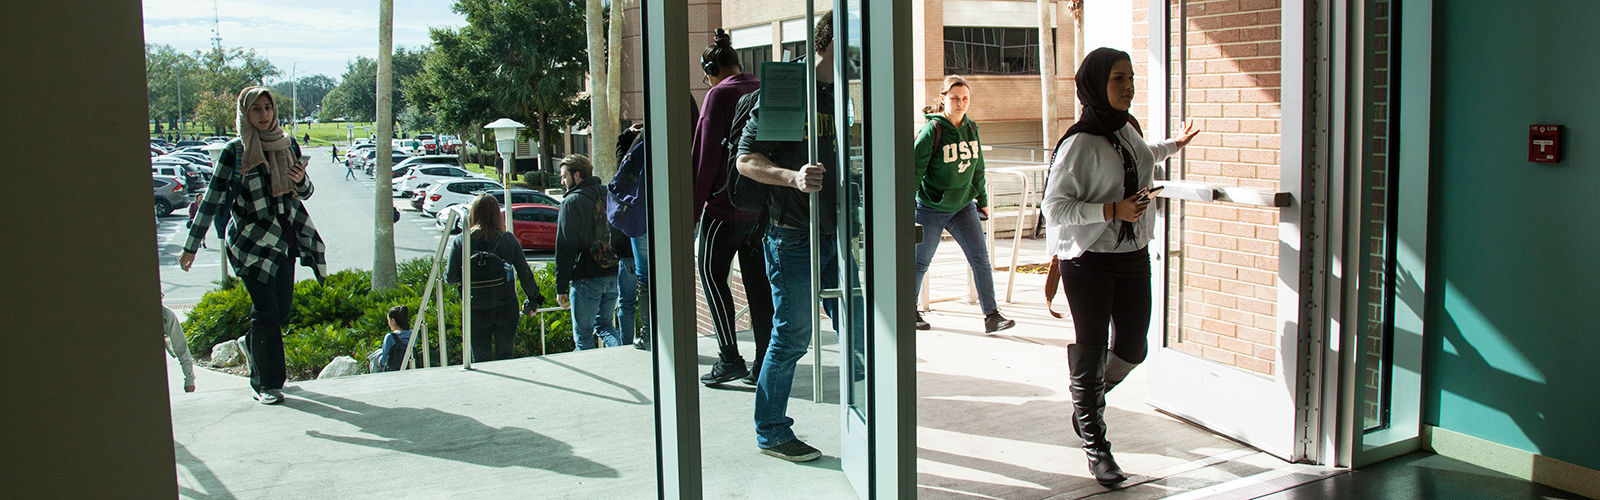 Students head to classes in the USF Interdisciplinary Sciences building.